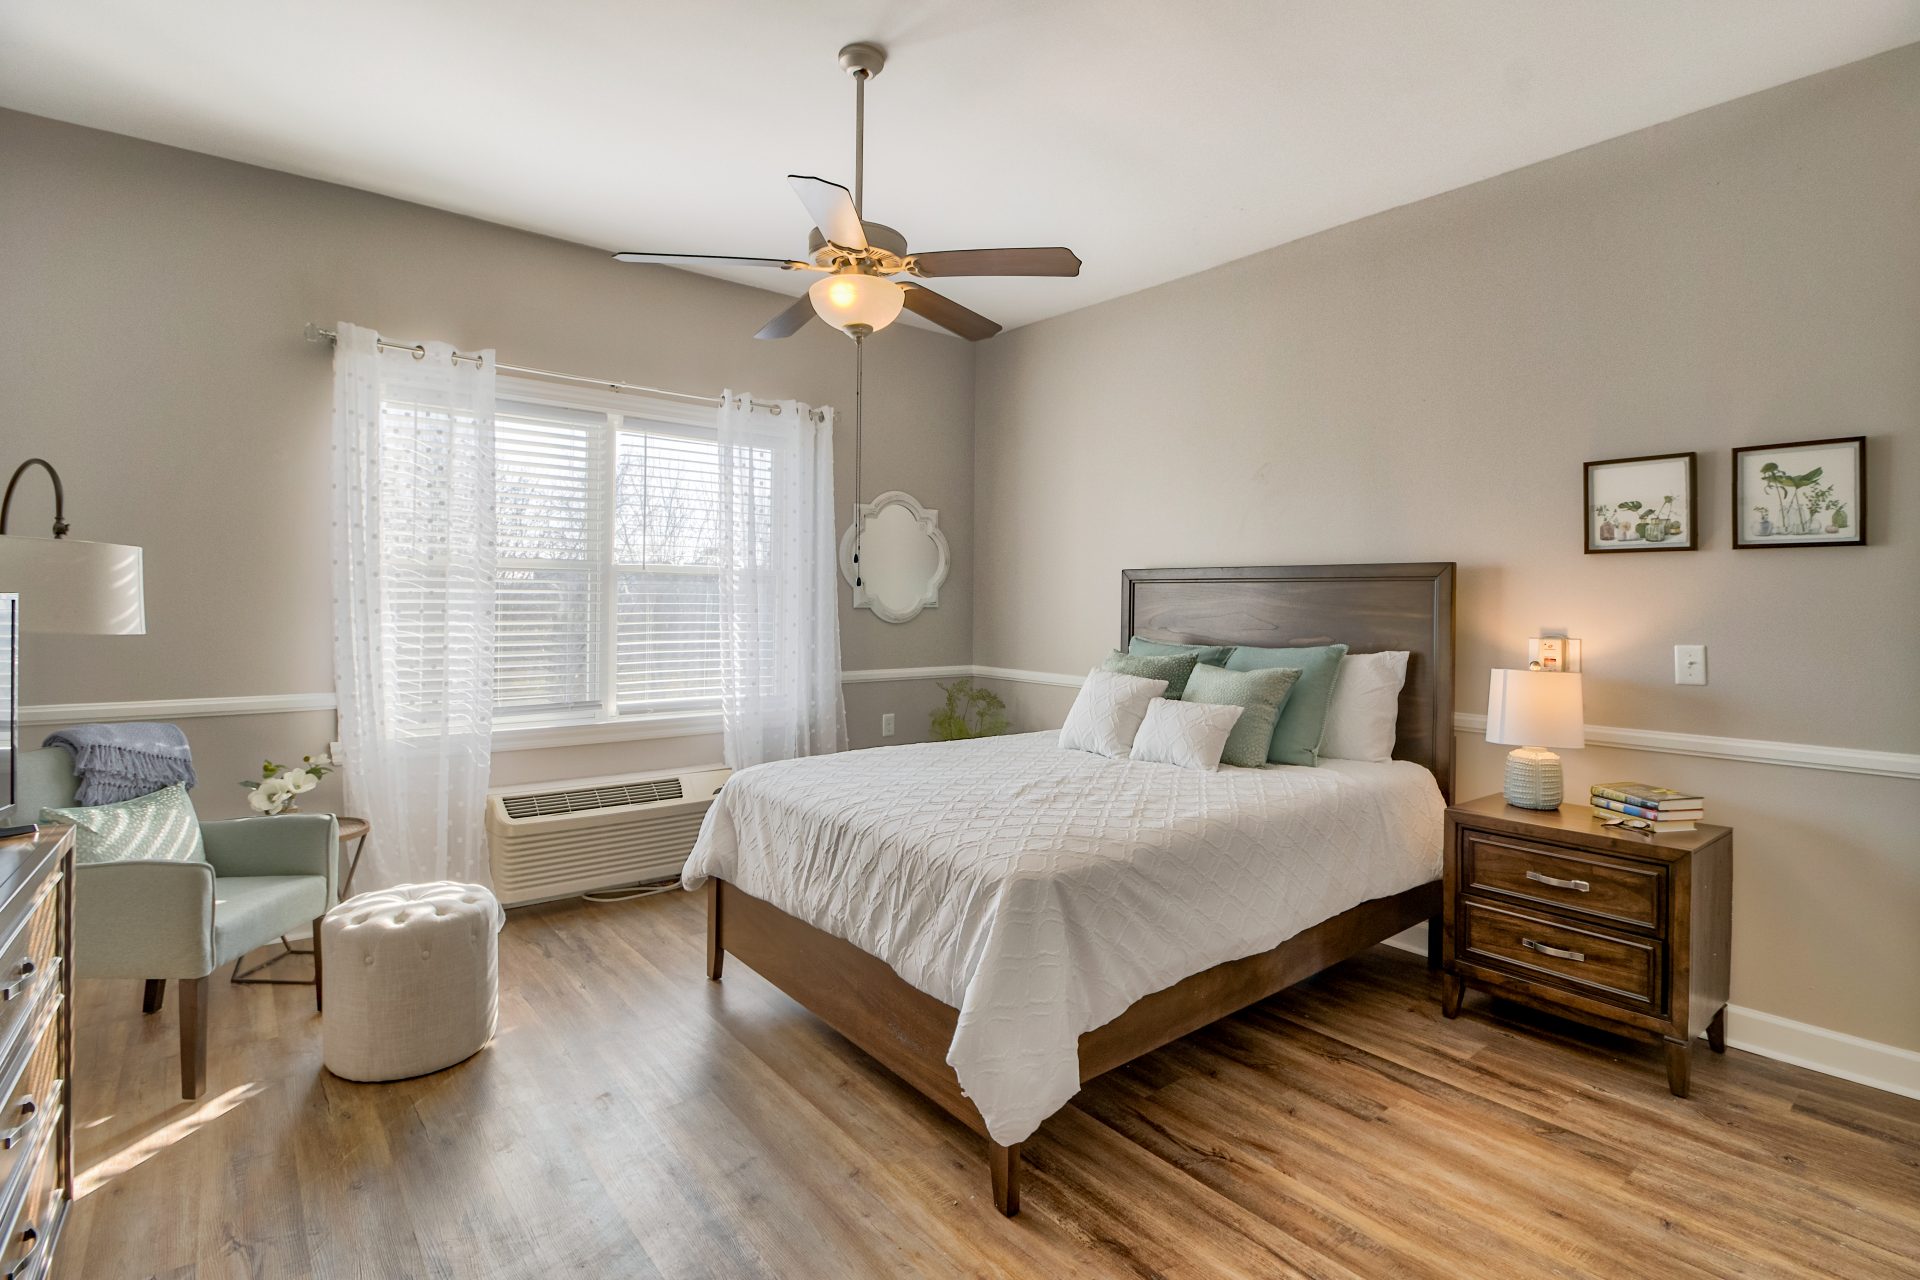 A cozy senior living unit bedroom with a large bed, bedside table, armchair, and ample natural light.